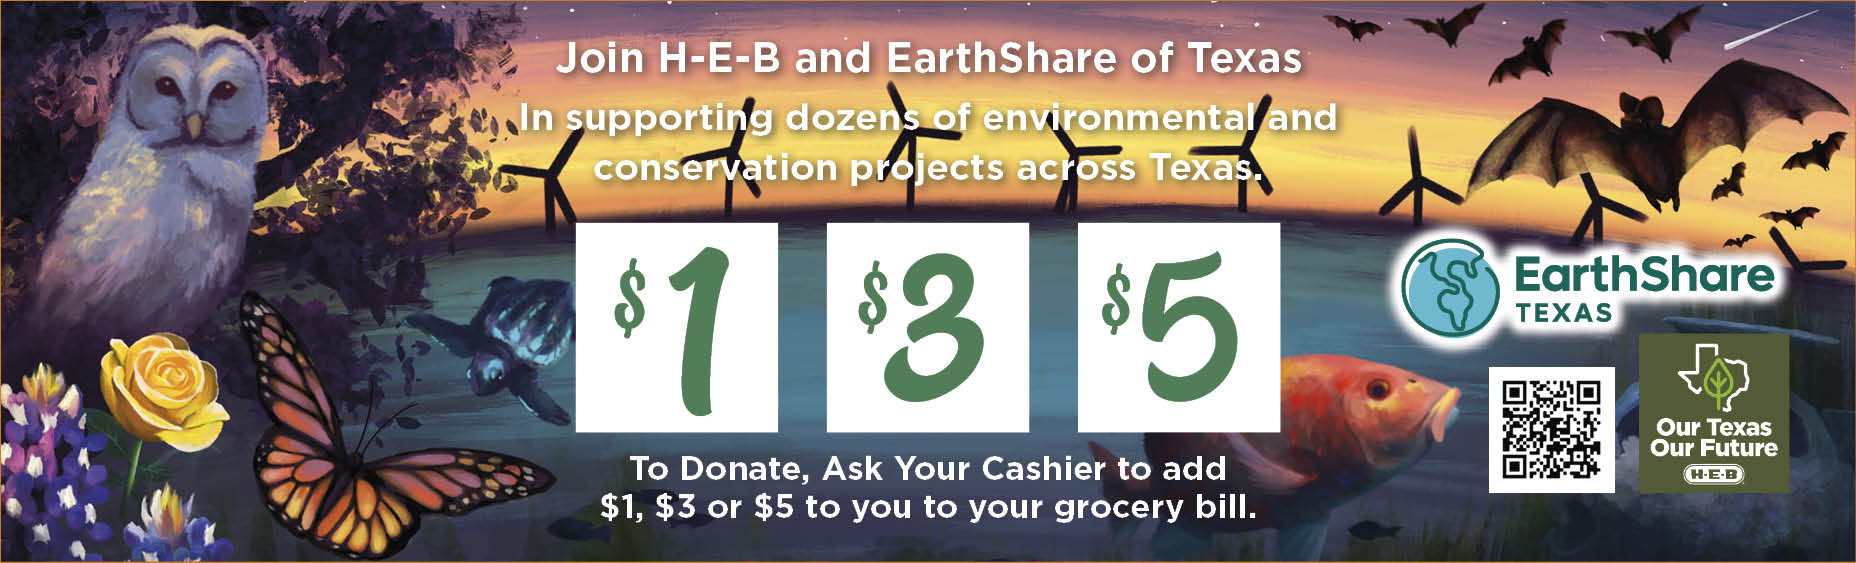 Donate to EarthShare Texas at HEB